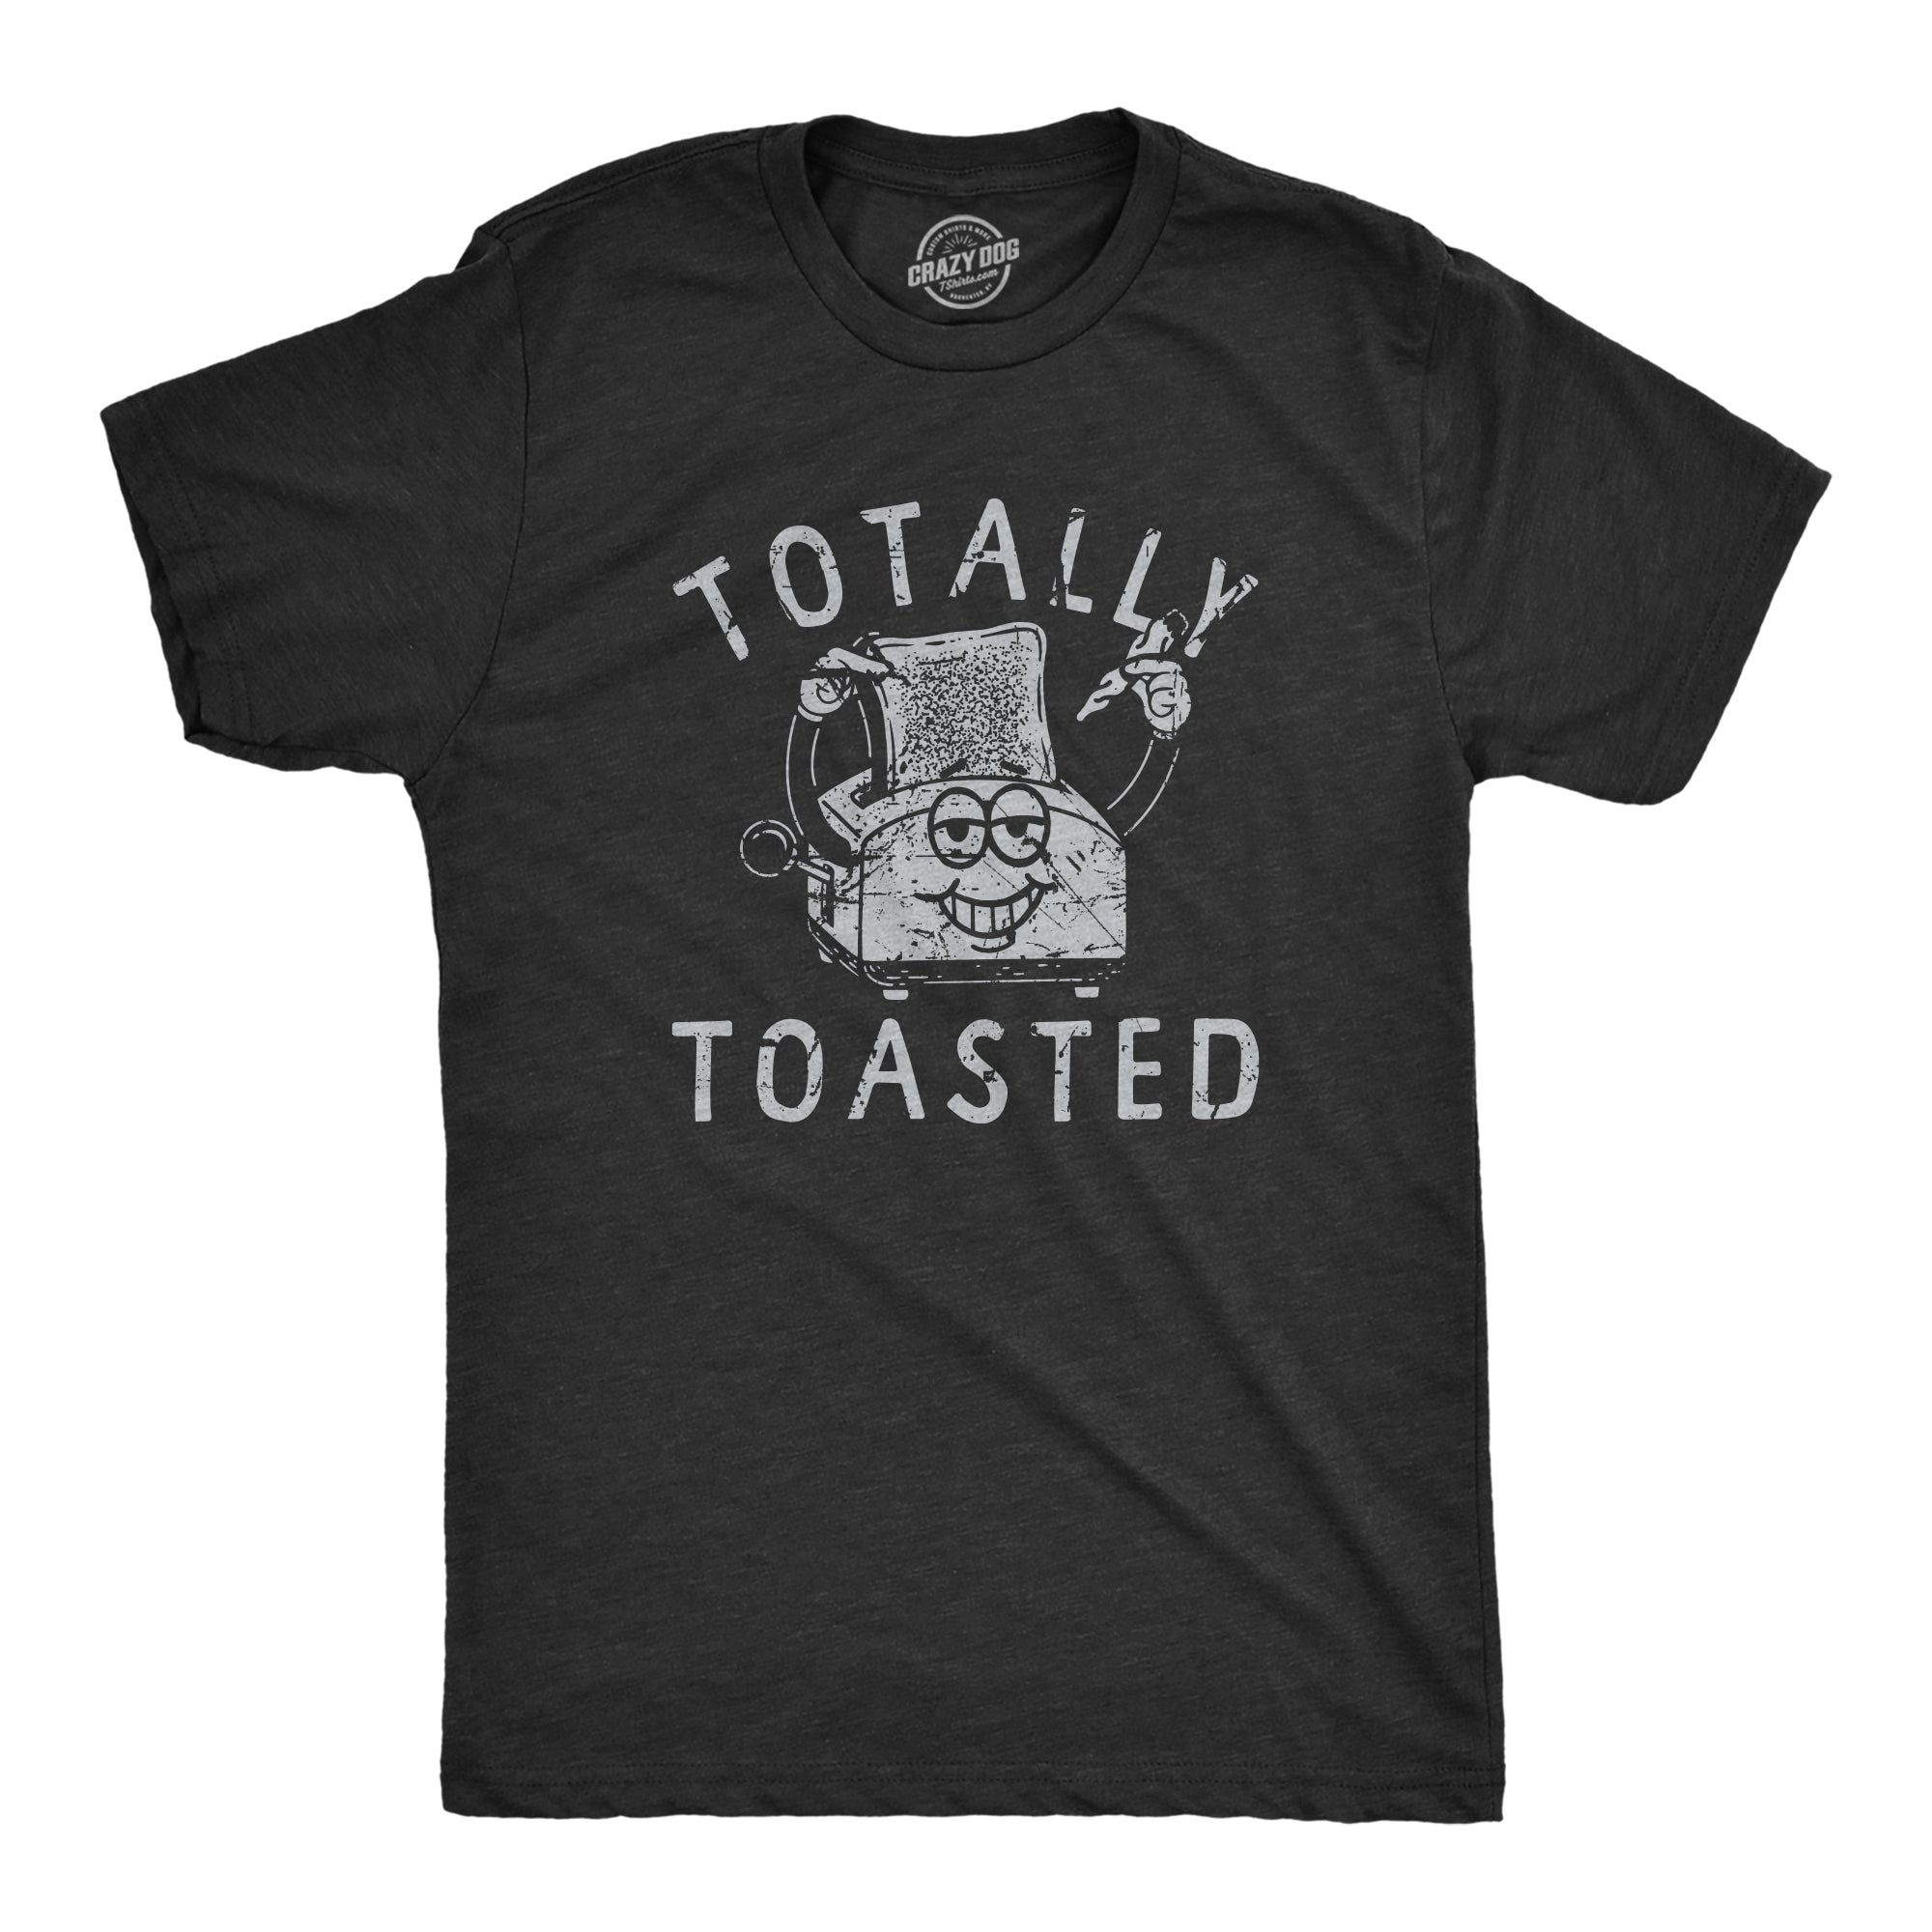 Funny Heather Black - TOASTED Totally Toasted Mens T Shirt Nerdy 420 Sarcastic Tee